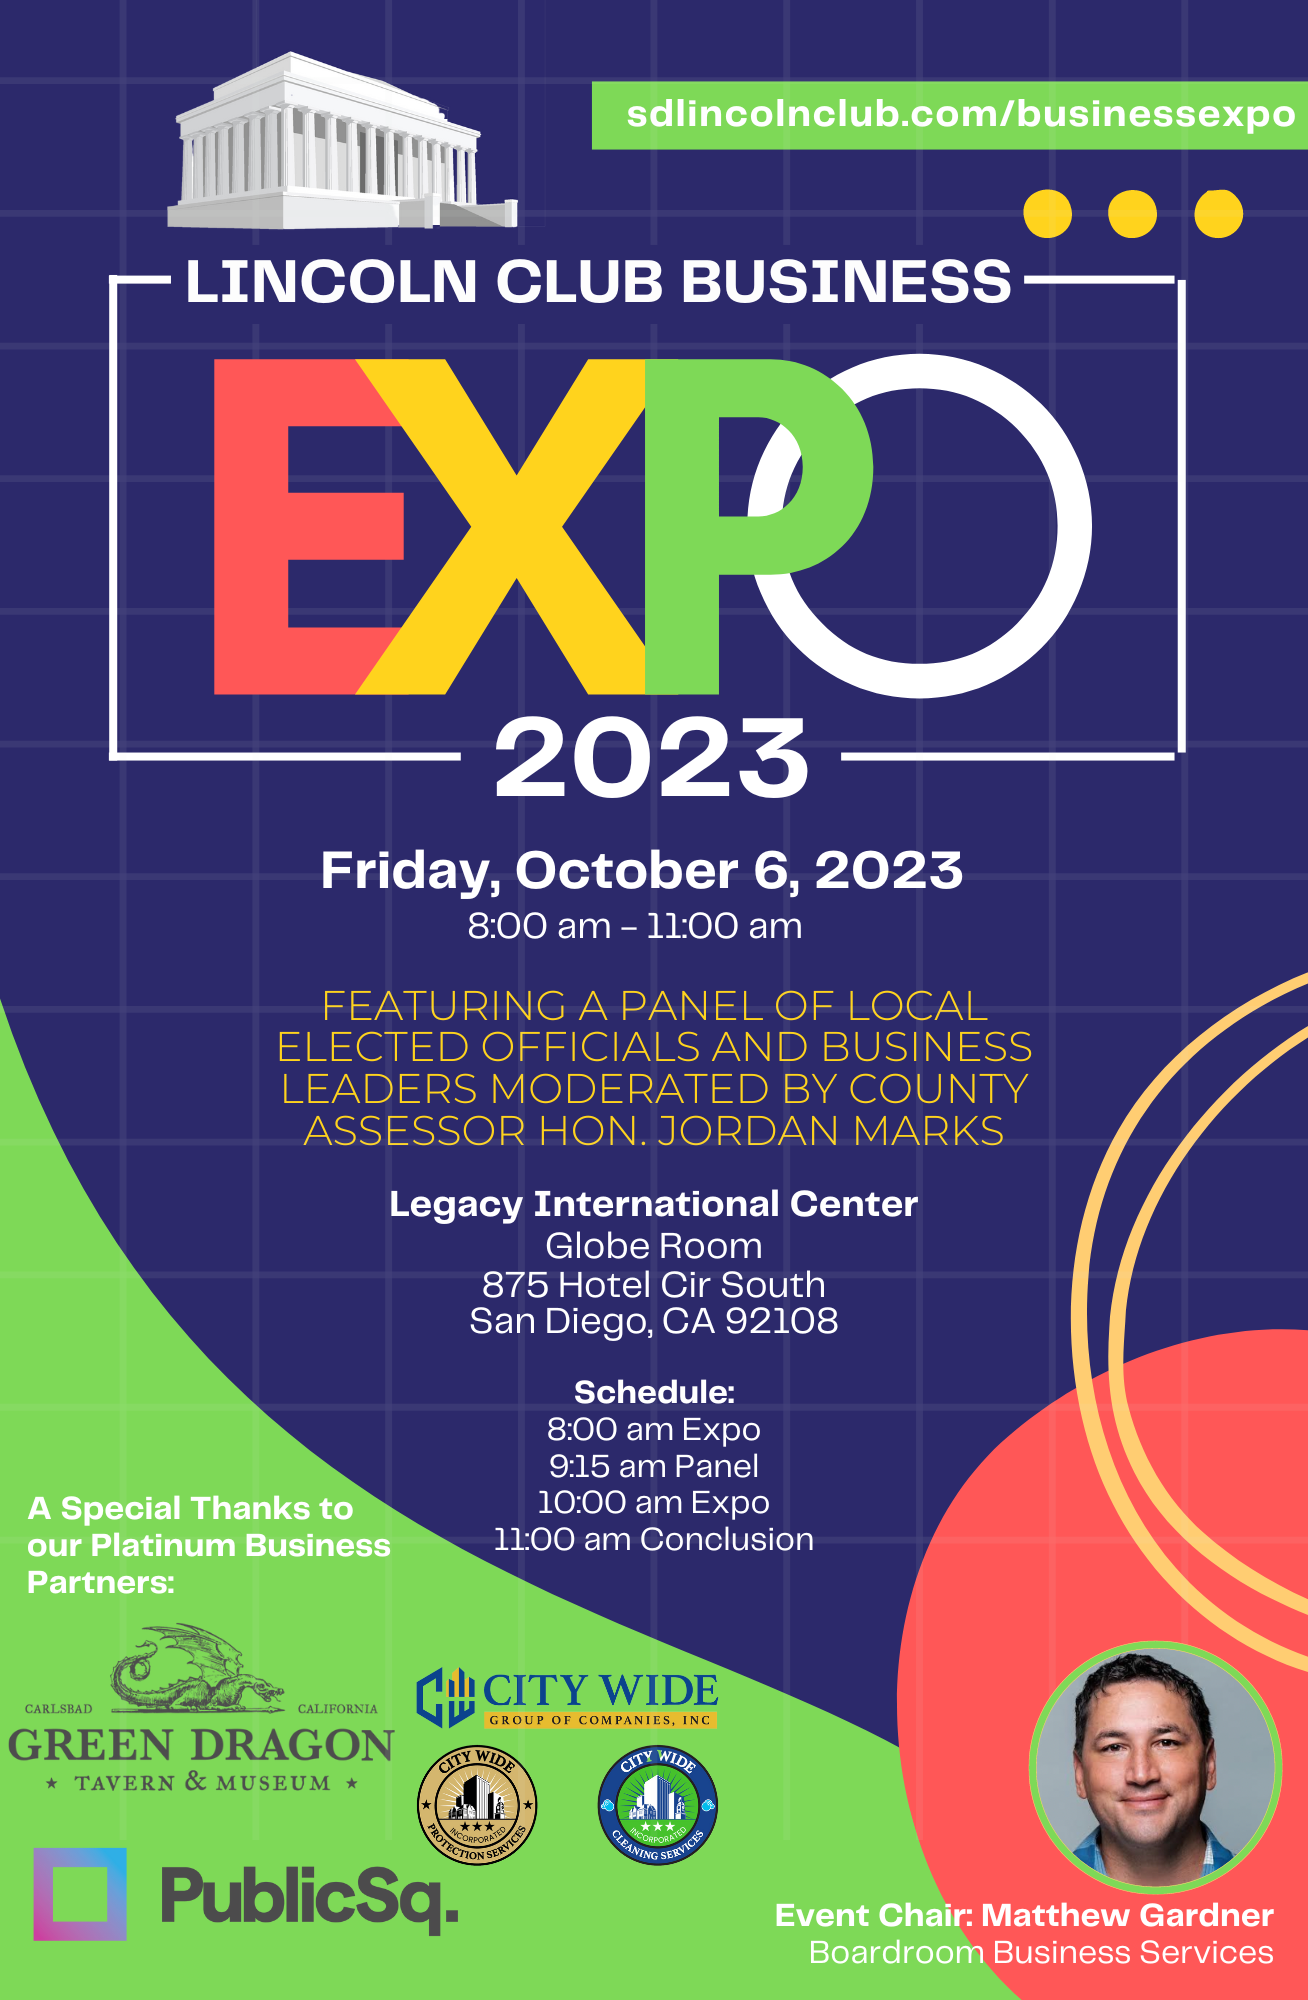 Lincoln Club Business Expo 2023 (1)